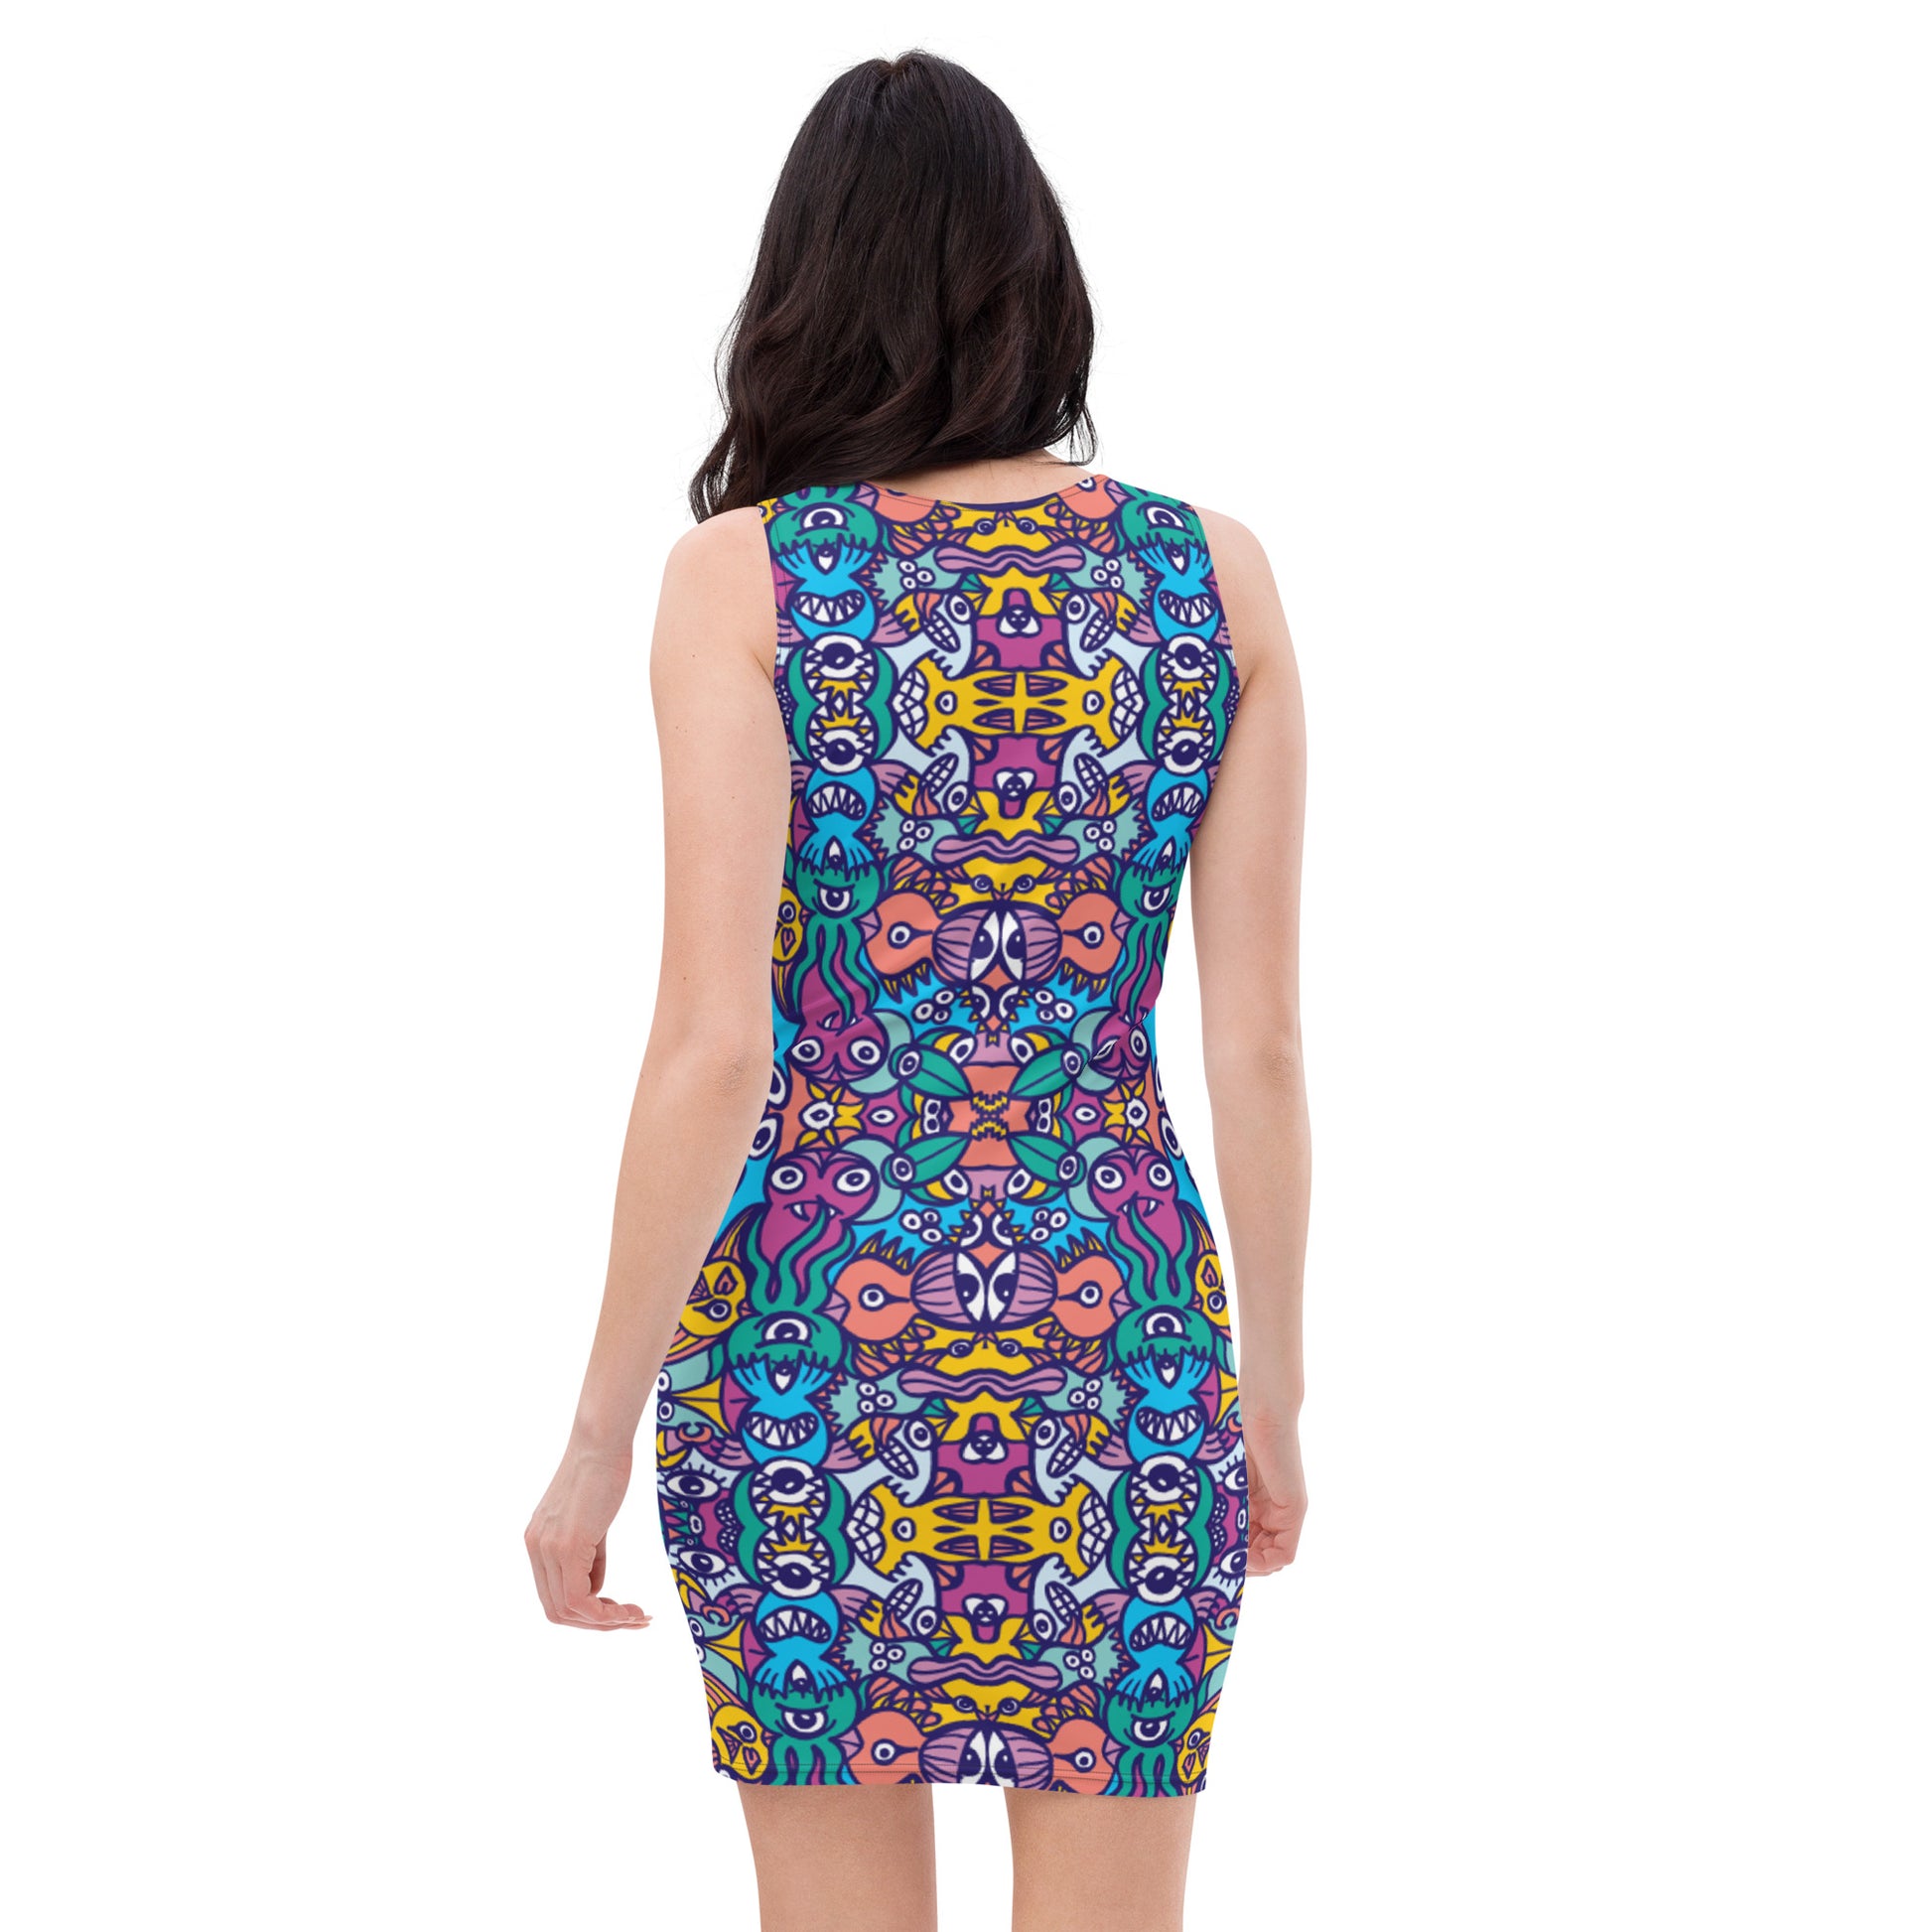 Whimsical design featuring multicolor critters from another world Sublimation Cut & Sew Dress. Back view